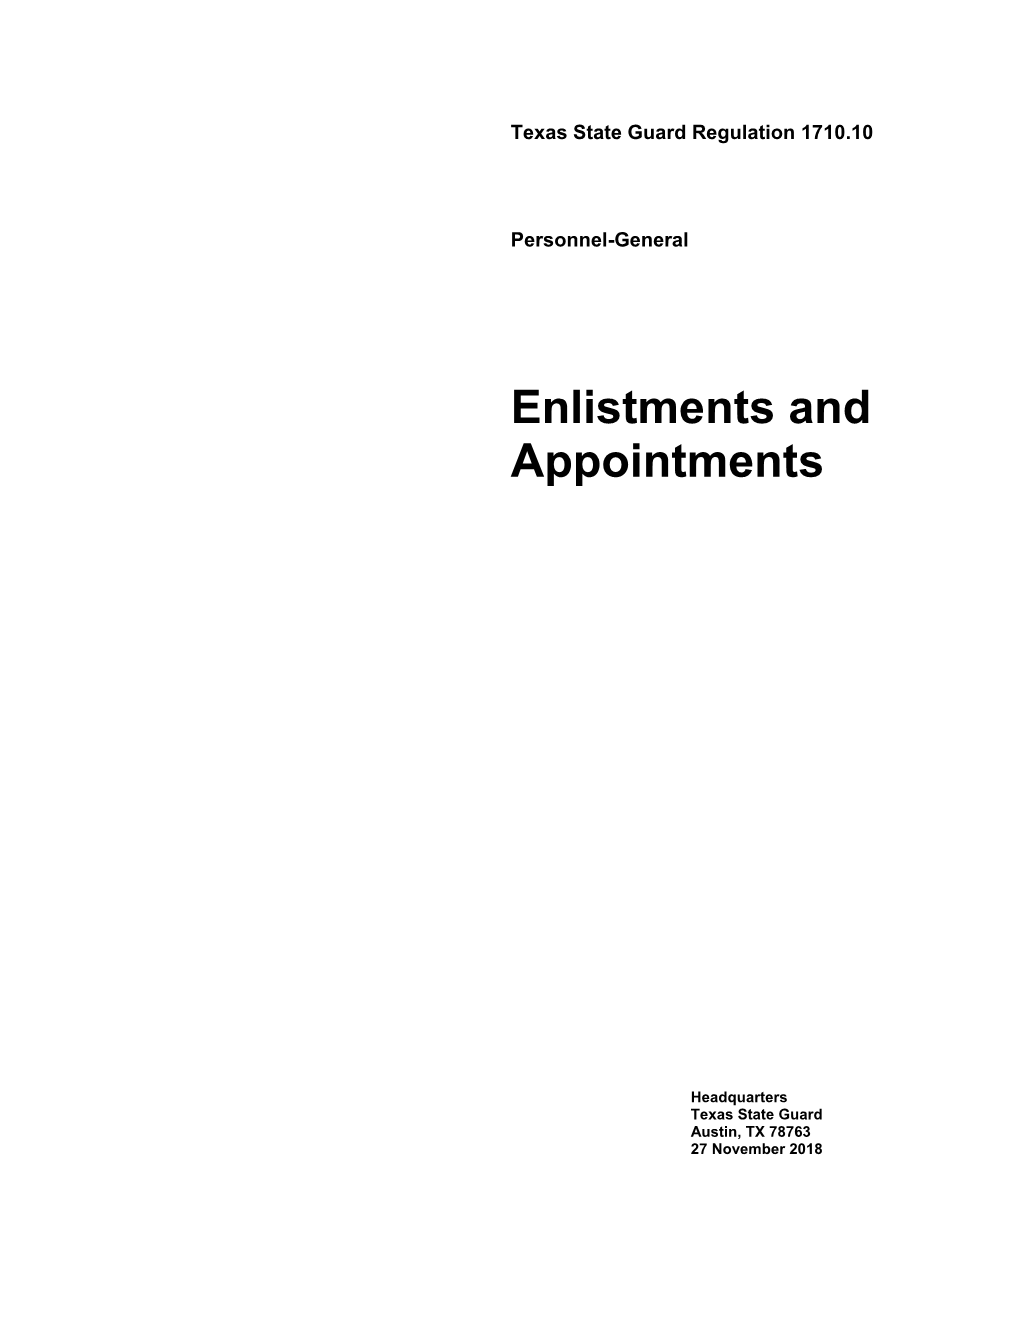 Enlistments and Appointments